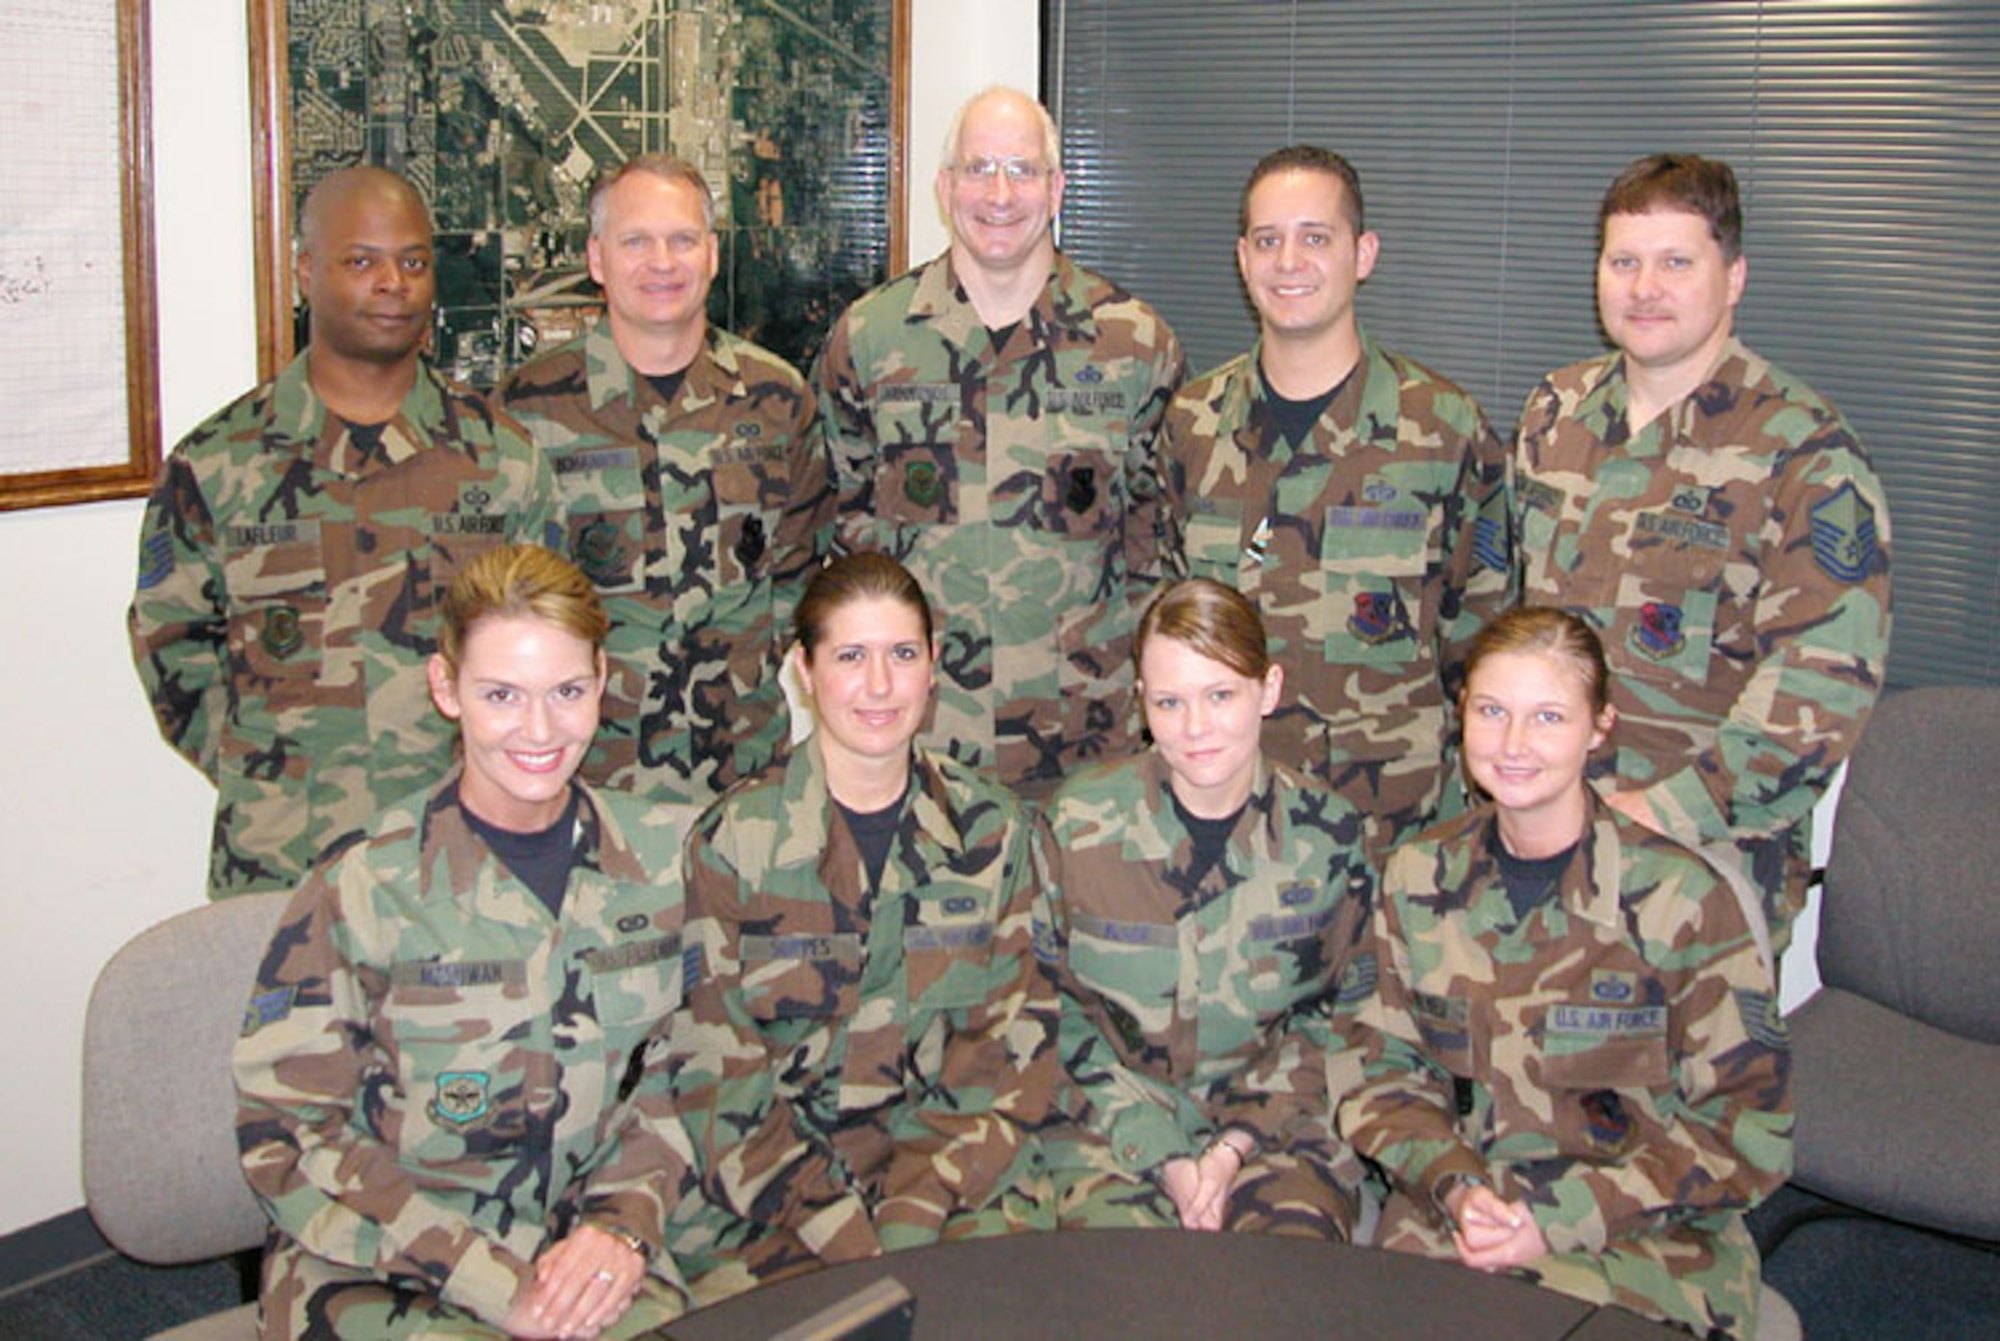 Command post controllers, pictured on front row: Senior Airman Jessica McCowan, Staff Sgts. Sarah Suppes and Geneva Black, and Tech. Sgt. Barbara Belyeu. Back row: Tech. Sgt. Paul LaFleur, Master Sgts. Christopher Bohannon, Richard Hammonds, James Rock and Mike Taliaferro. Not pictured:  Senior Airman Kimberly Goshorn and Staff. Sgt. Sara Gaddis    
                                               